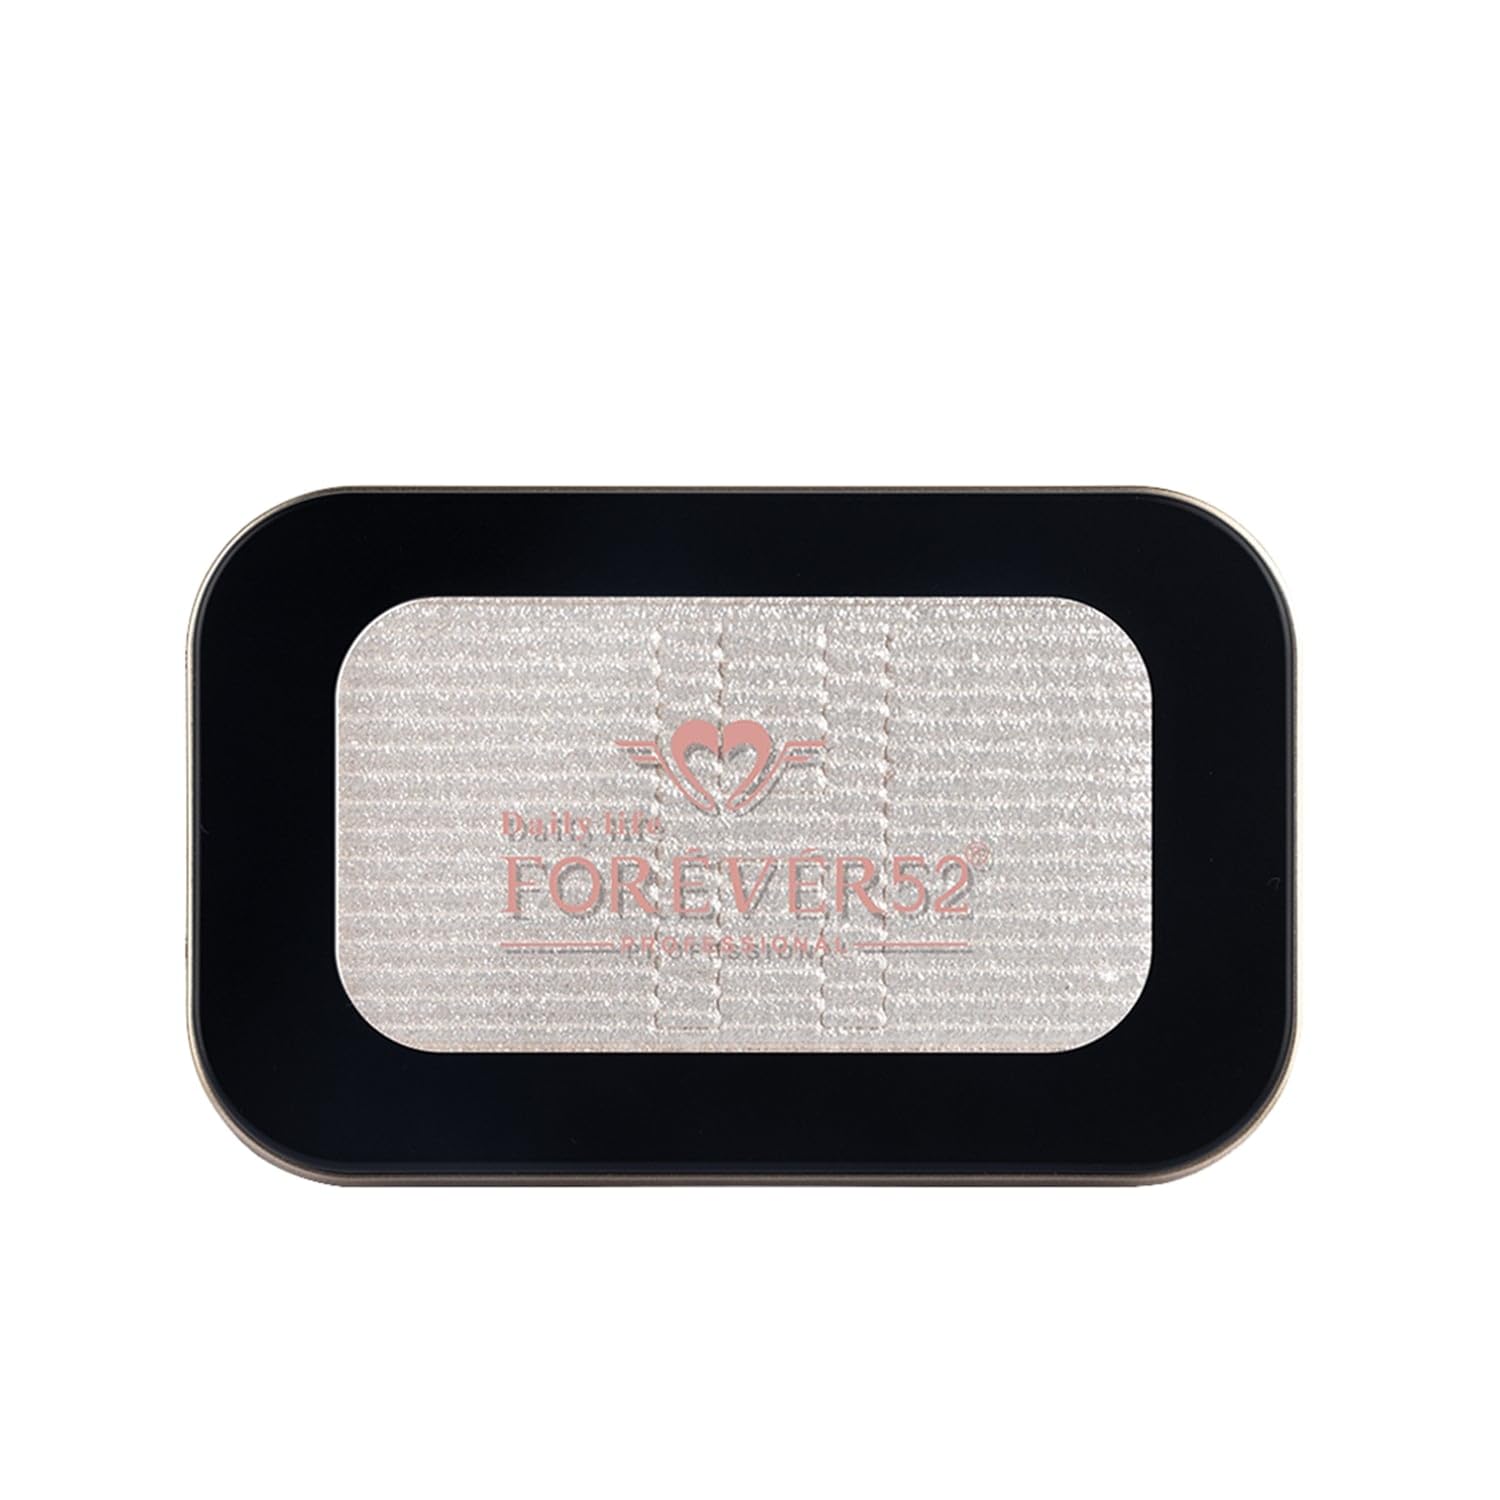 Daily Life Forever52 Glow On Highlighter Highly-pigmented with Ultra-pearly Finish and Easy-to-blend Formula, for a Silky and Shimmery Glowing Skin (FGH004)  from Forever52